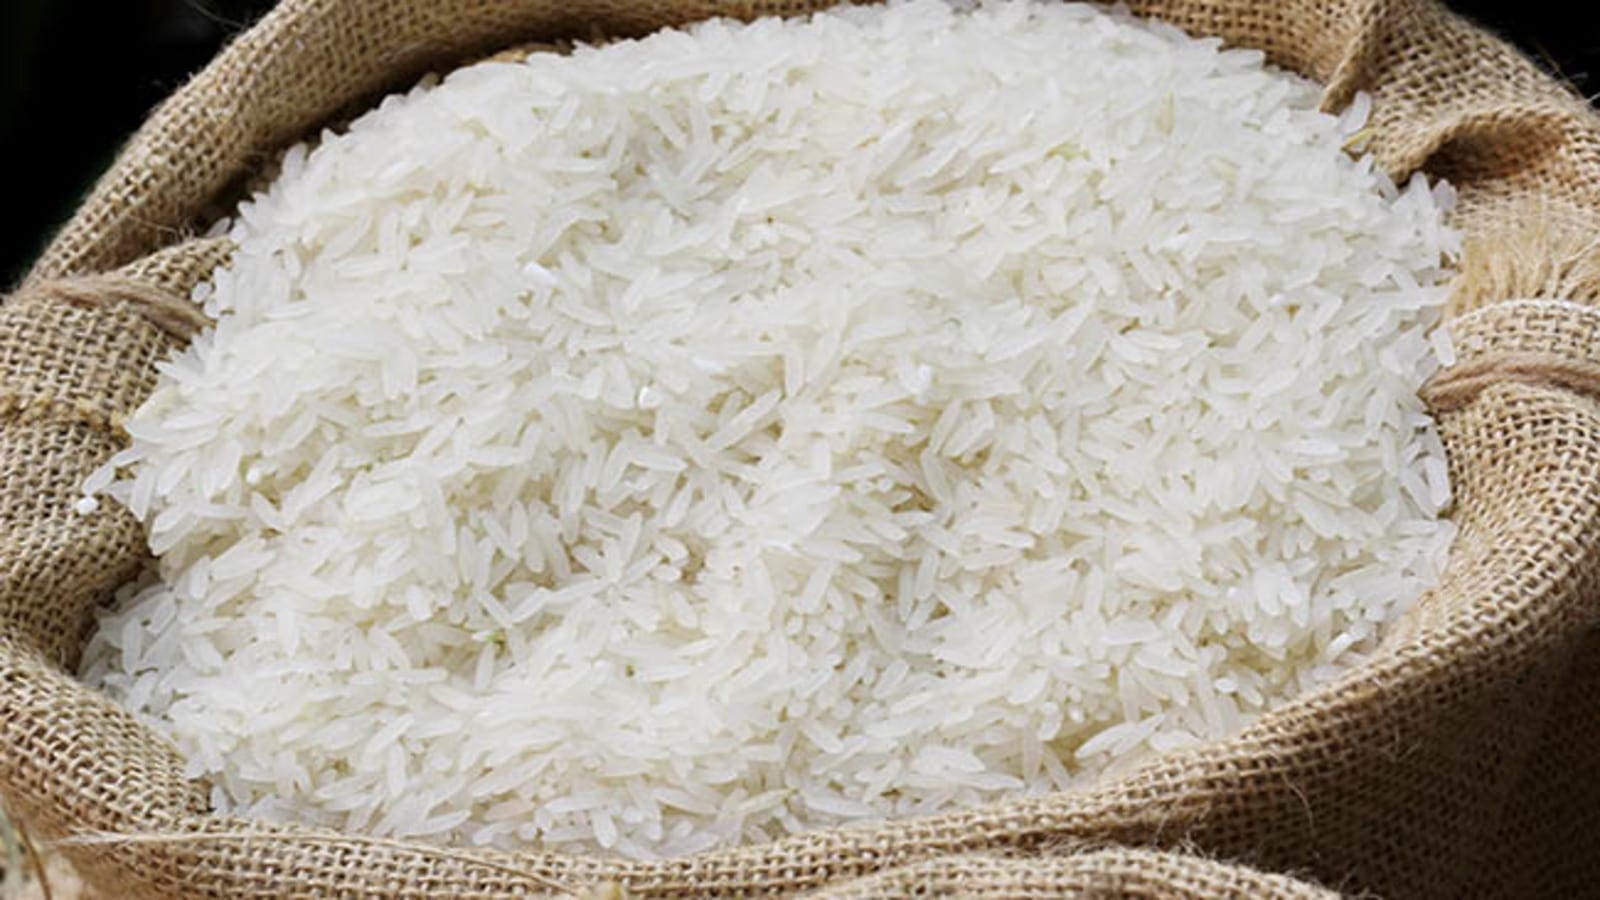 Research institutions in Nigeria develop GE rice to bolster yields